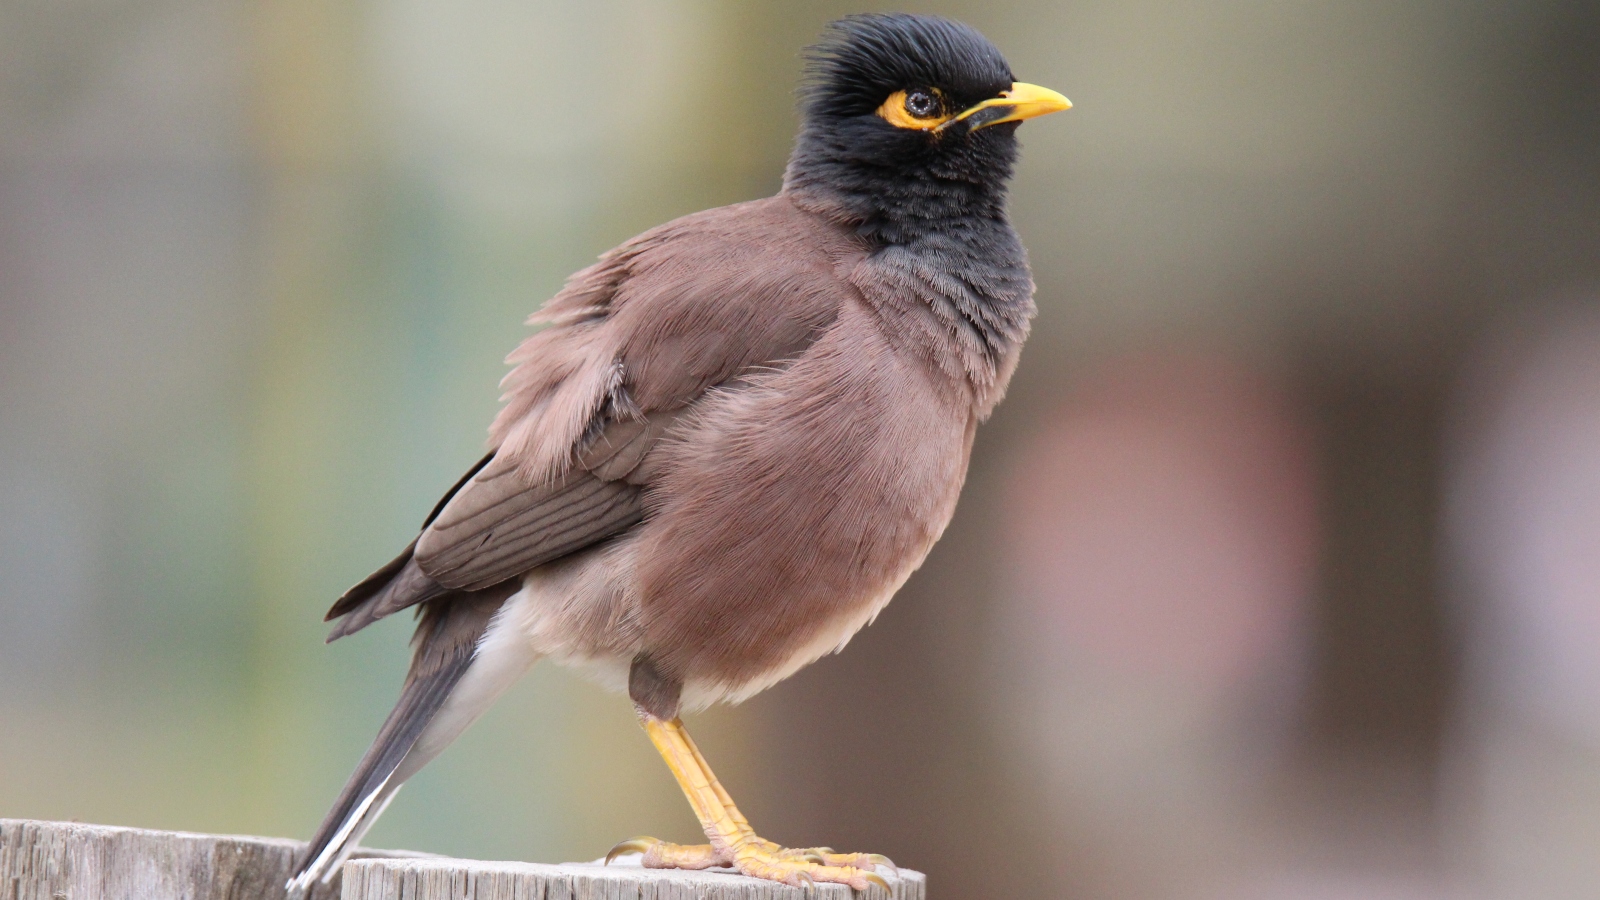 Invasive common myna (Acridotheres tristis). Photo by Ehud Fast